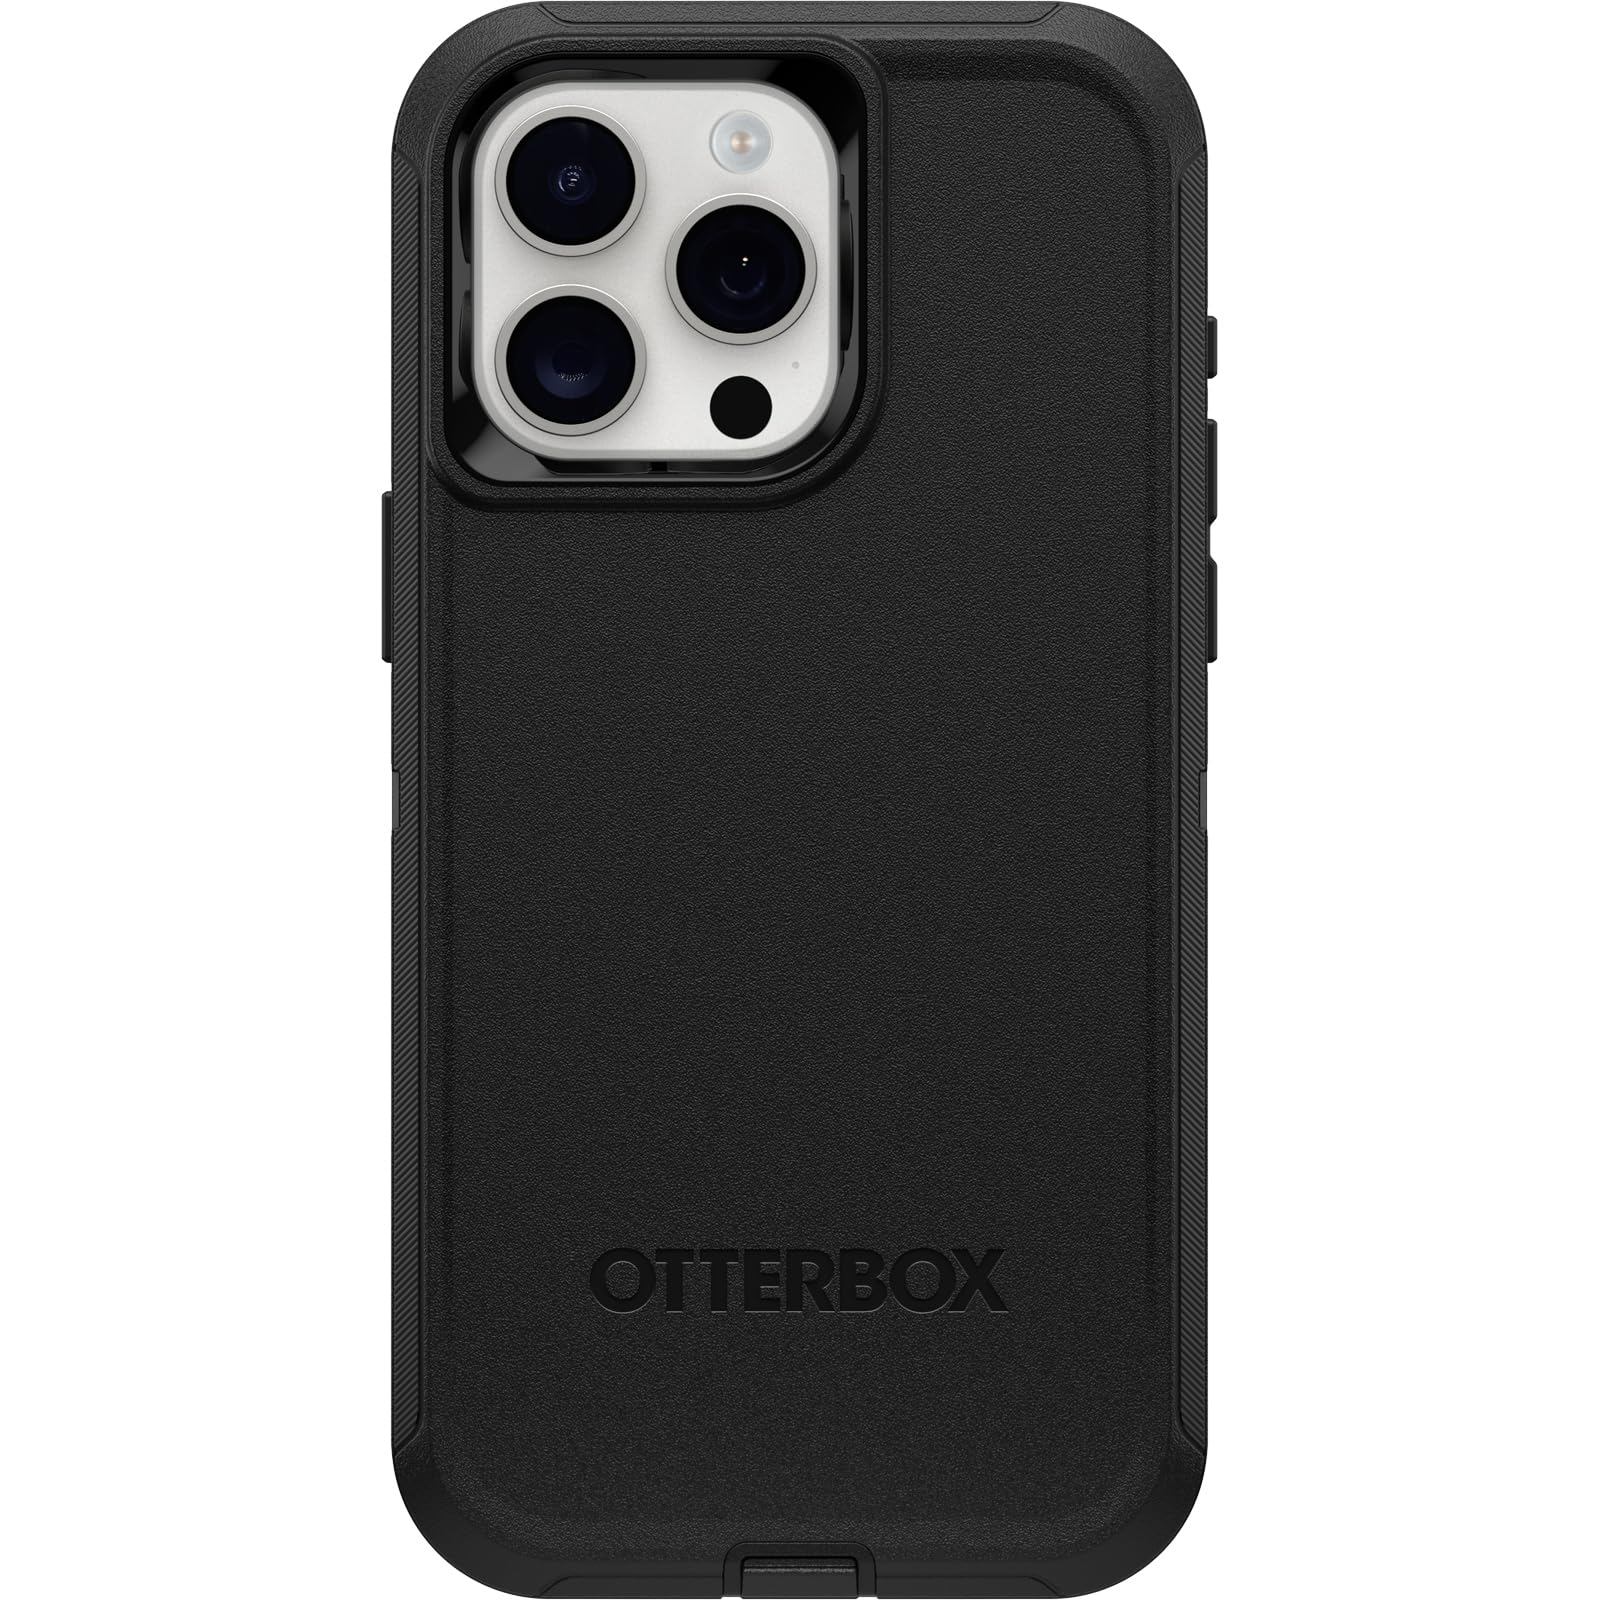 OtterBox iPhone 15 Pro MAX (Only) Defender Series Case - BLACK, screenless, rugged & durable, with port protection, includes holster clip kickstand